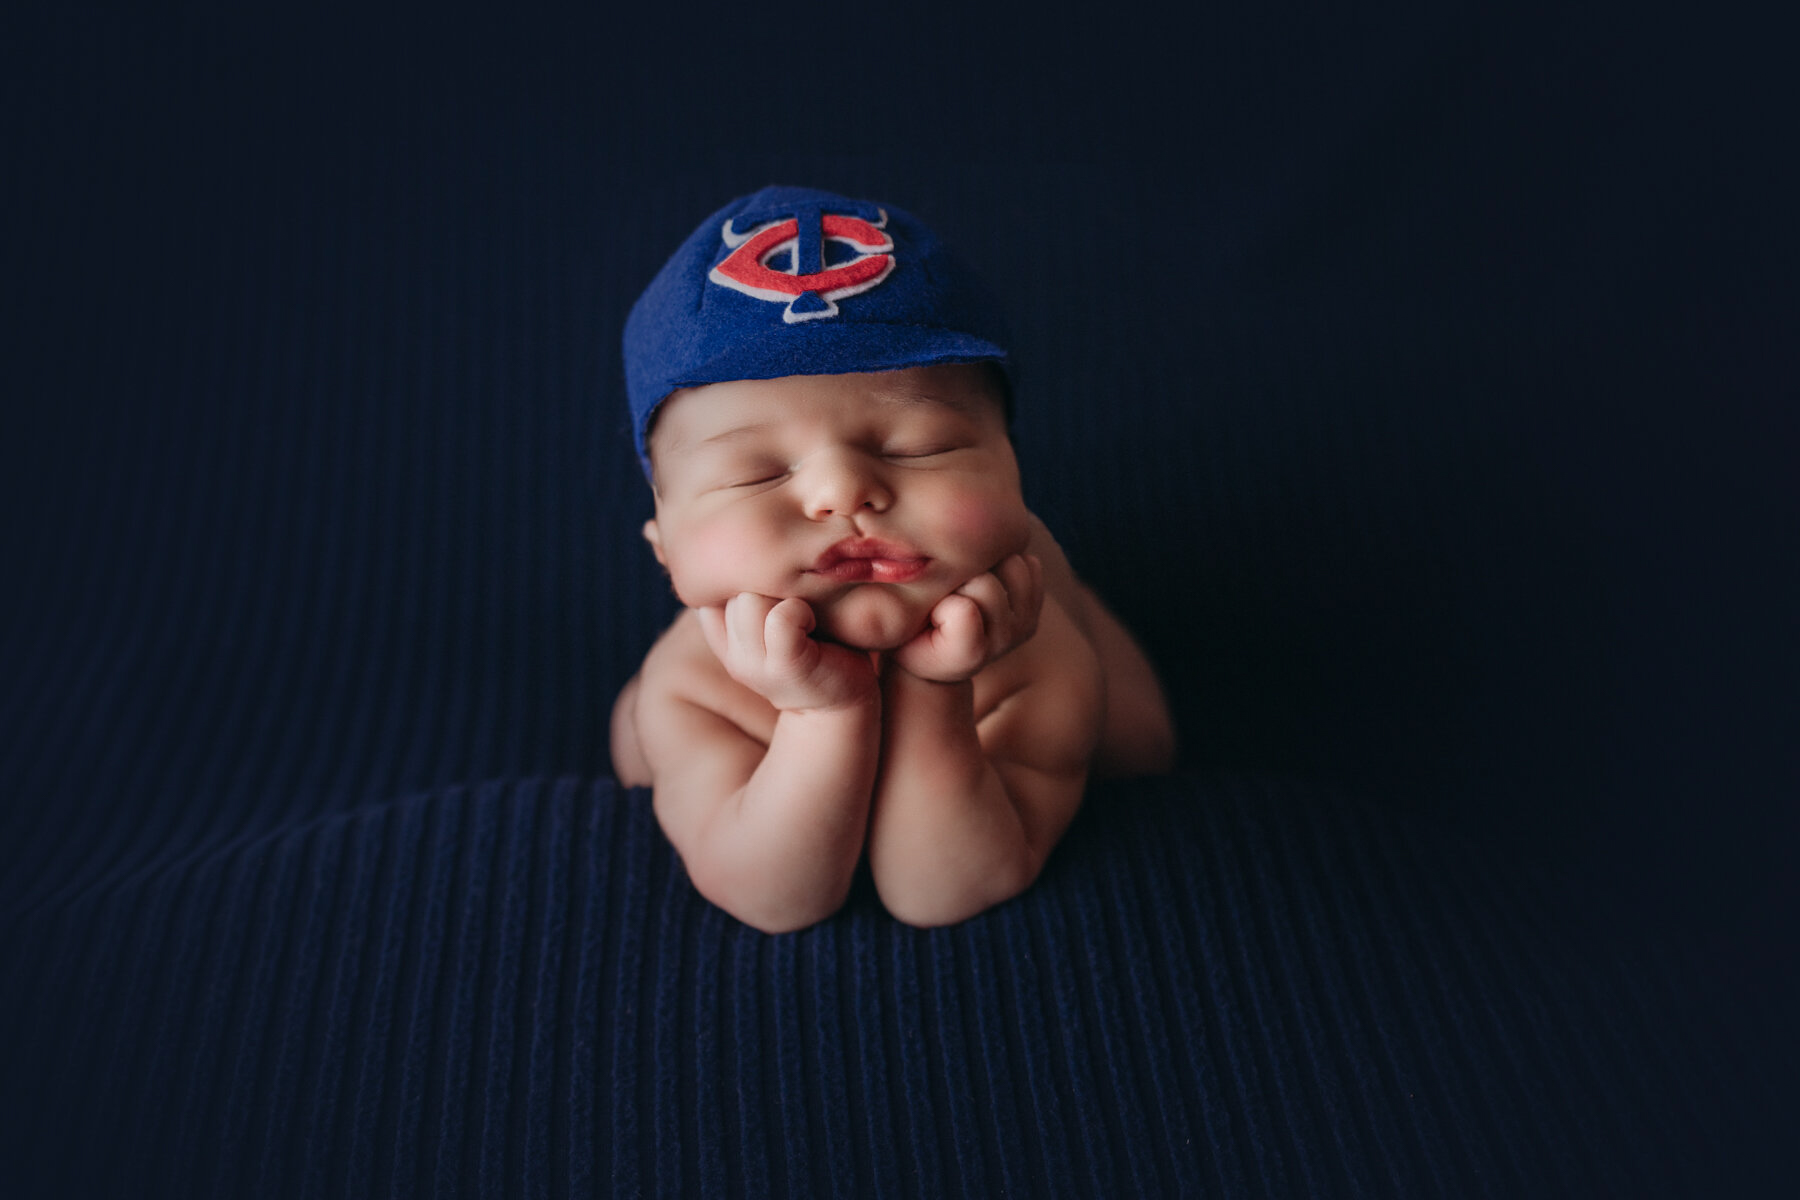 Minneapolis MN Newborn Photographer | Why I Ask What You Like to do on Weekends